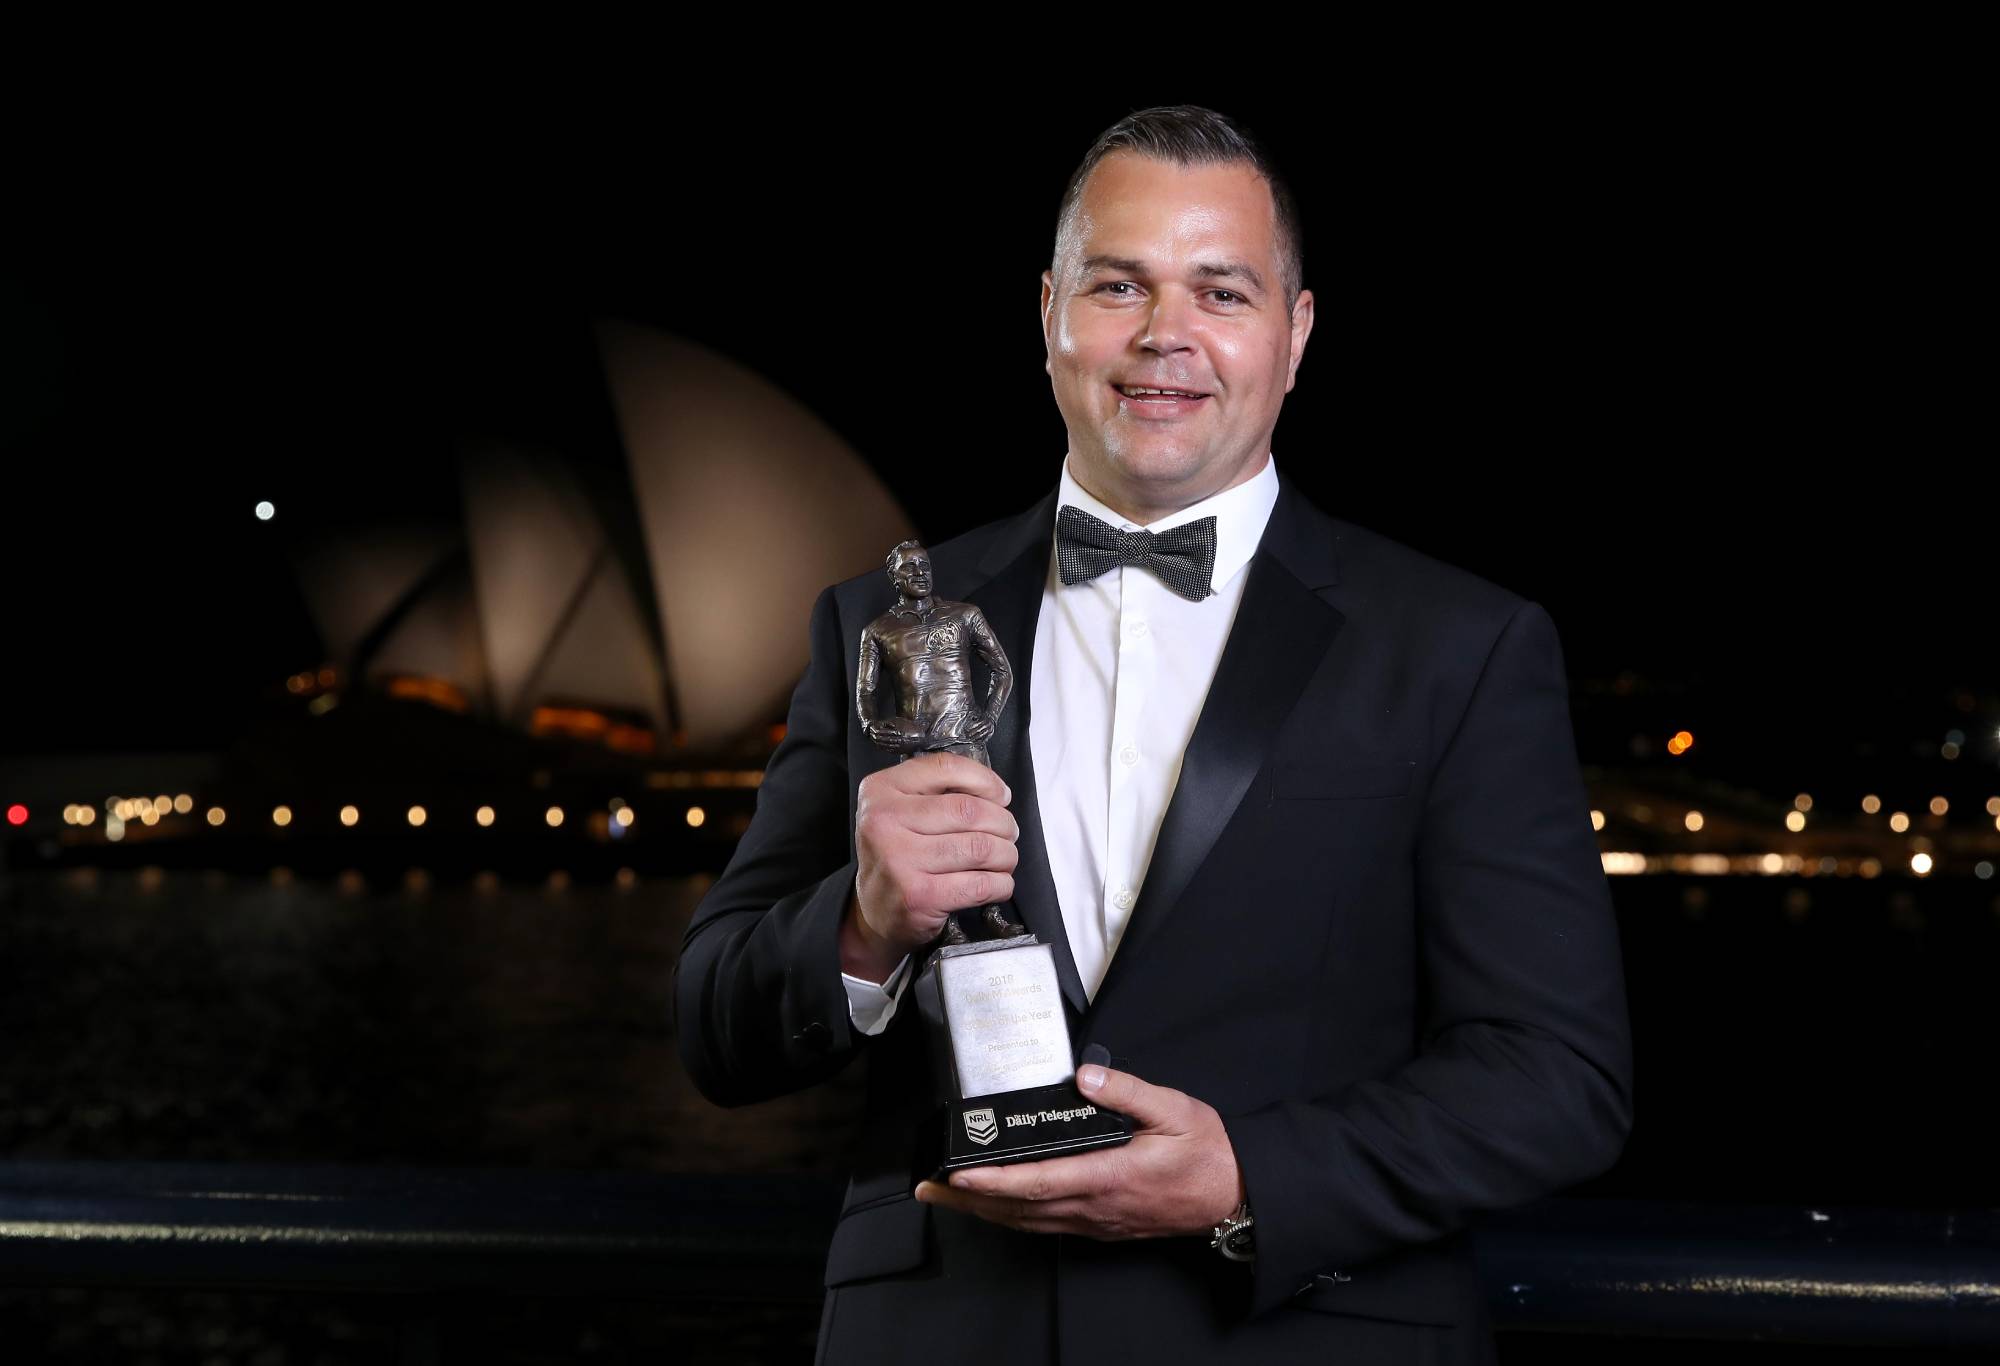 SYDNEY, AUSTRALIA - SEPTEMBER 26: South Sydney Rabbitohs coach Anthony Seibold receives the Dally M Coach of the Year Award during the 2018 Dally M Awards on September 26, 2018 in Sydney, Australia. (Photo by Cameron Spencer/Getty Images)